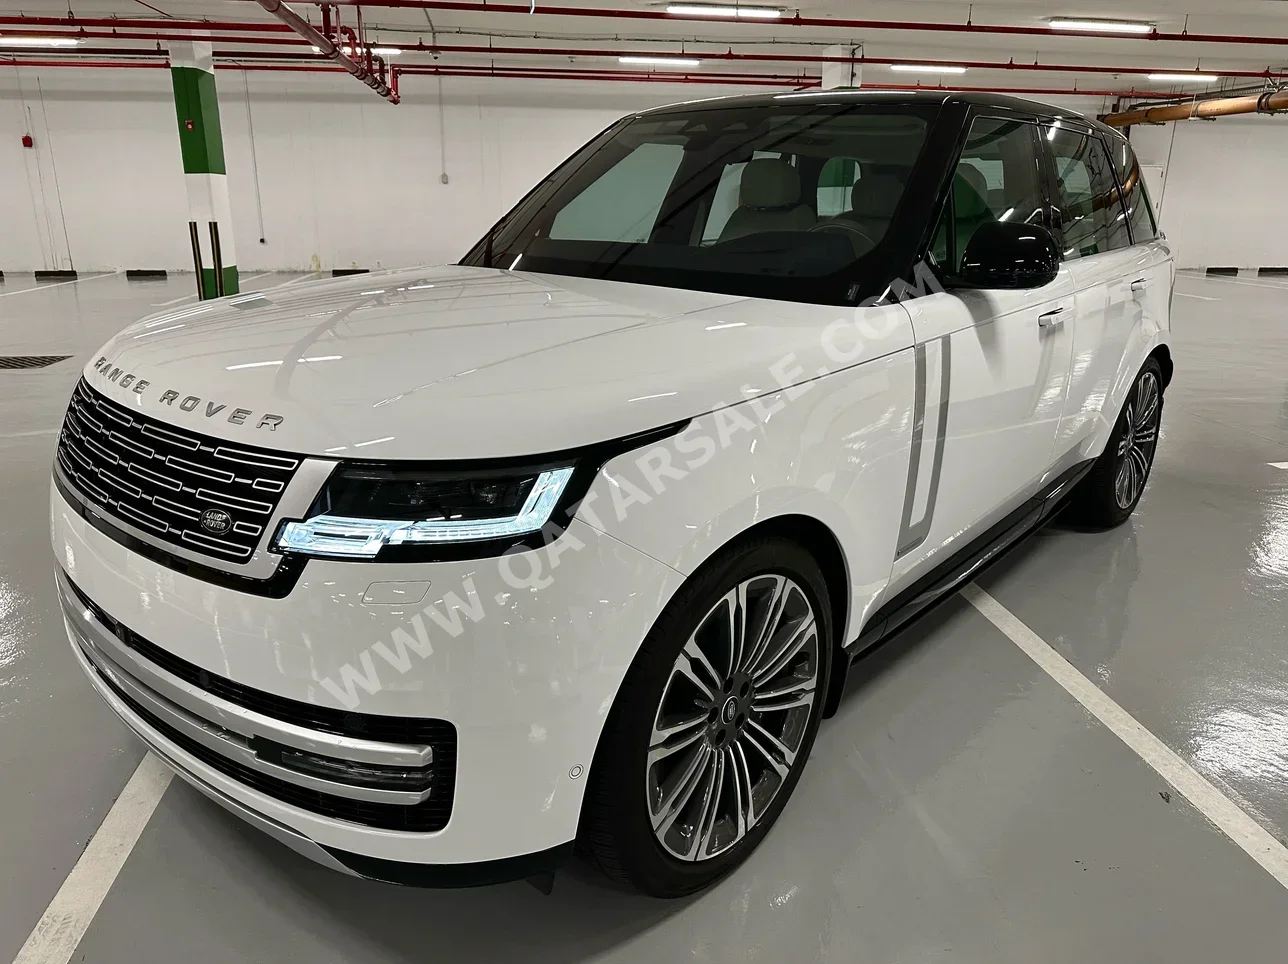 Land Rover  Range Rover  Vogue  Autobiography  2023  Automatic  15,000 Km  8 Cylinder  Four Wheel Drive (4WD)  SUV  White  With Warranty